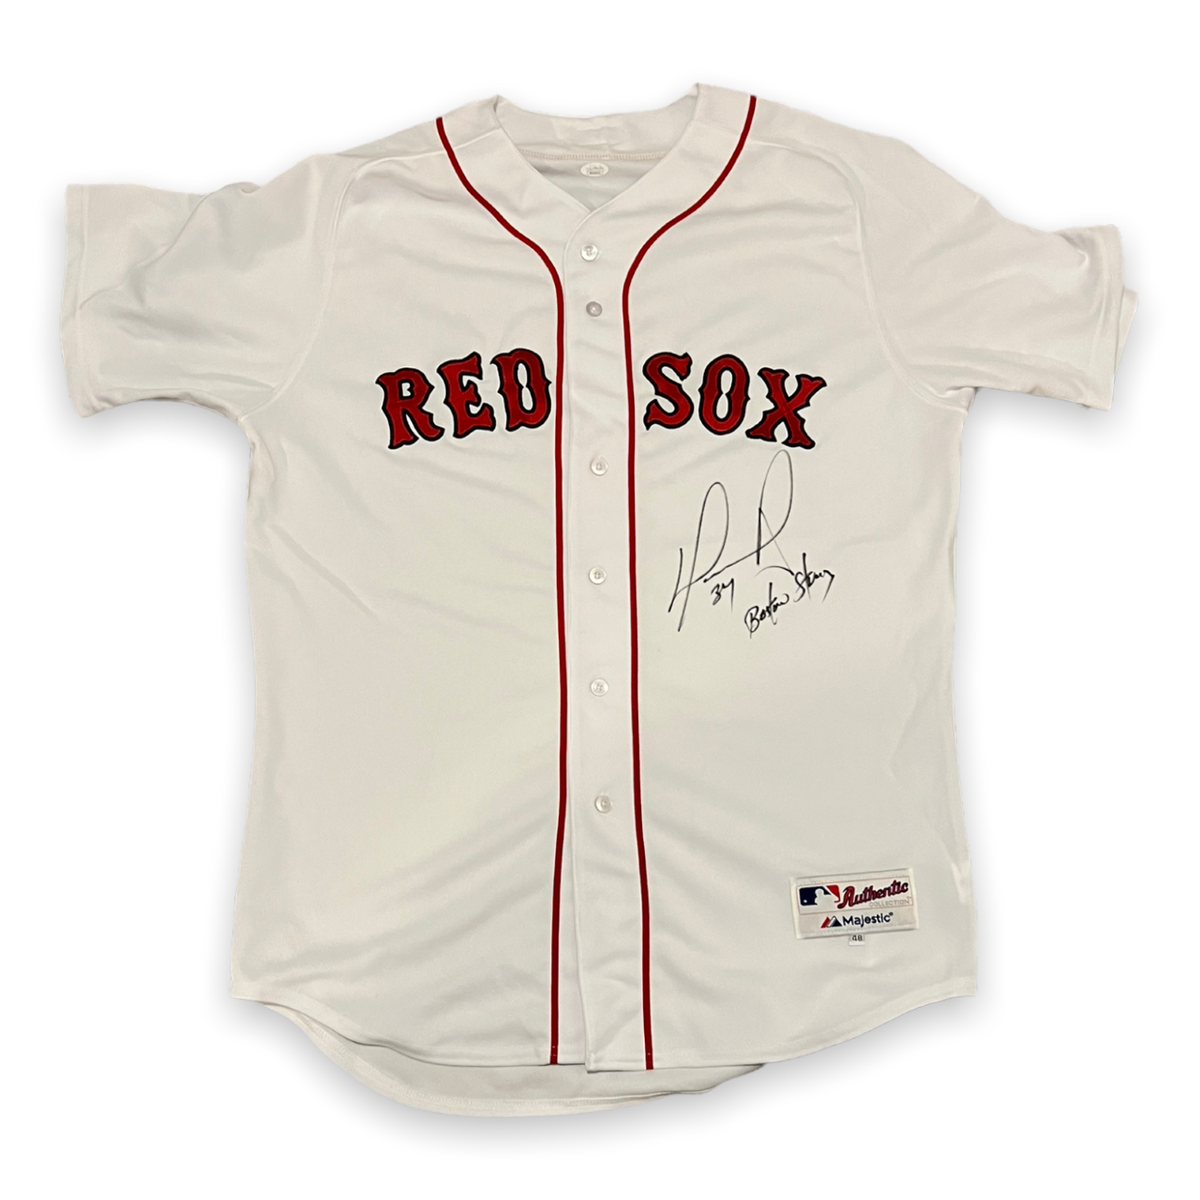 David Ortiz Signed Red Sox Salute to Service Jersey Inscribed Boston  Strong (Steiner COA, MLB Hologram & Fanatics Hologram)